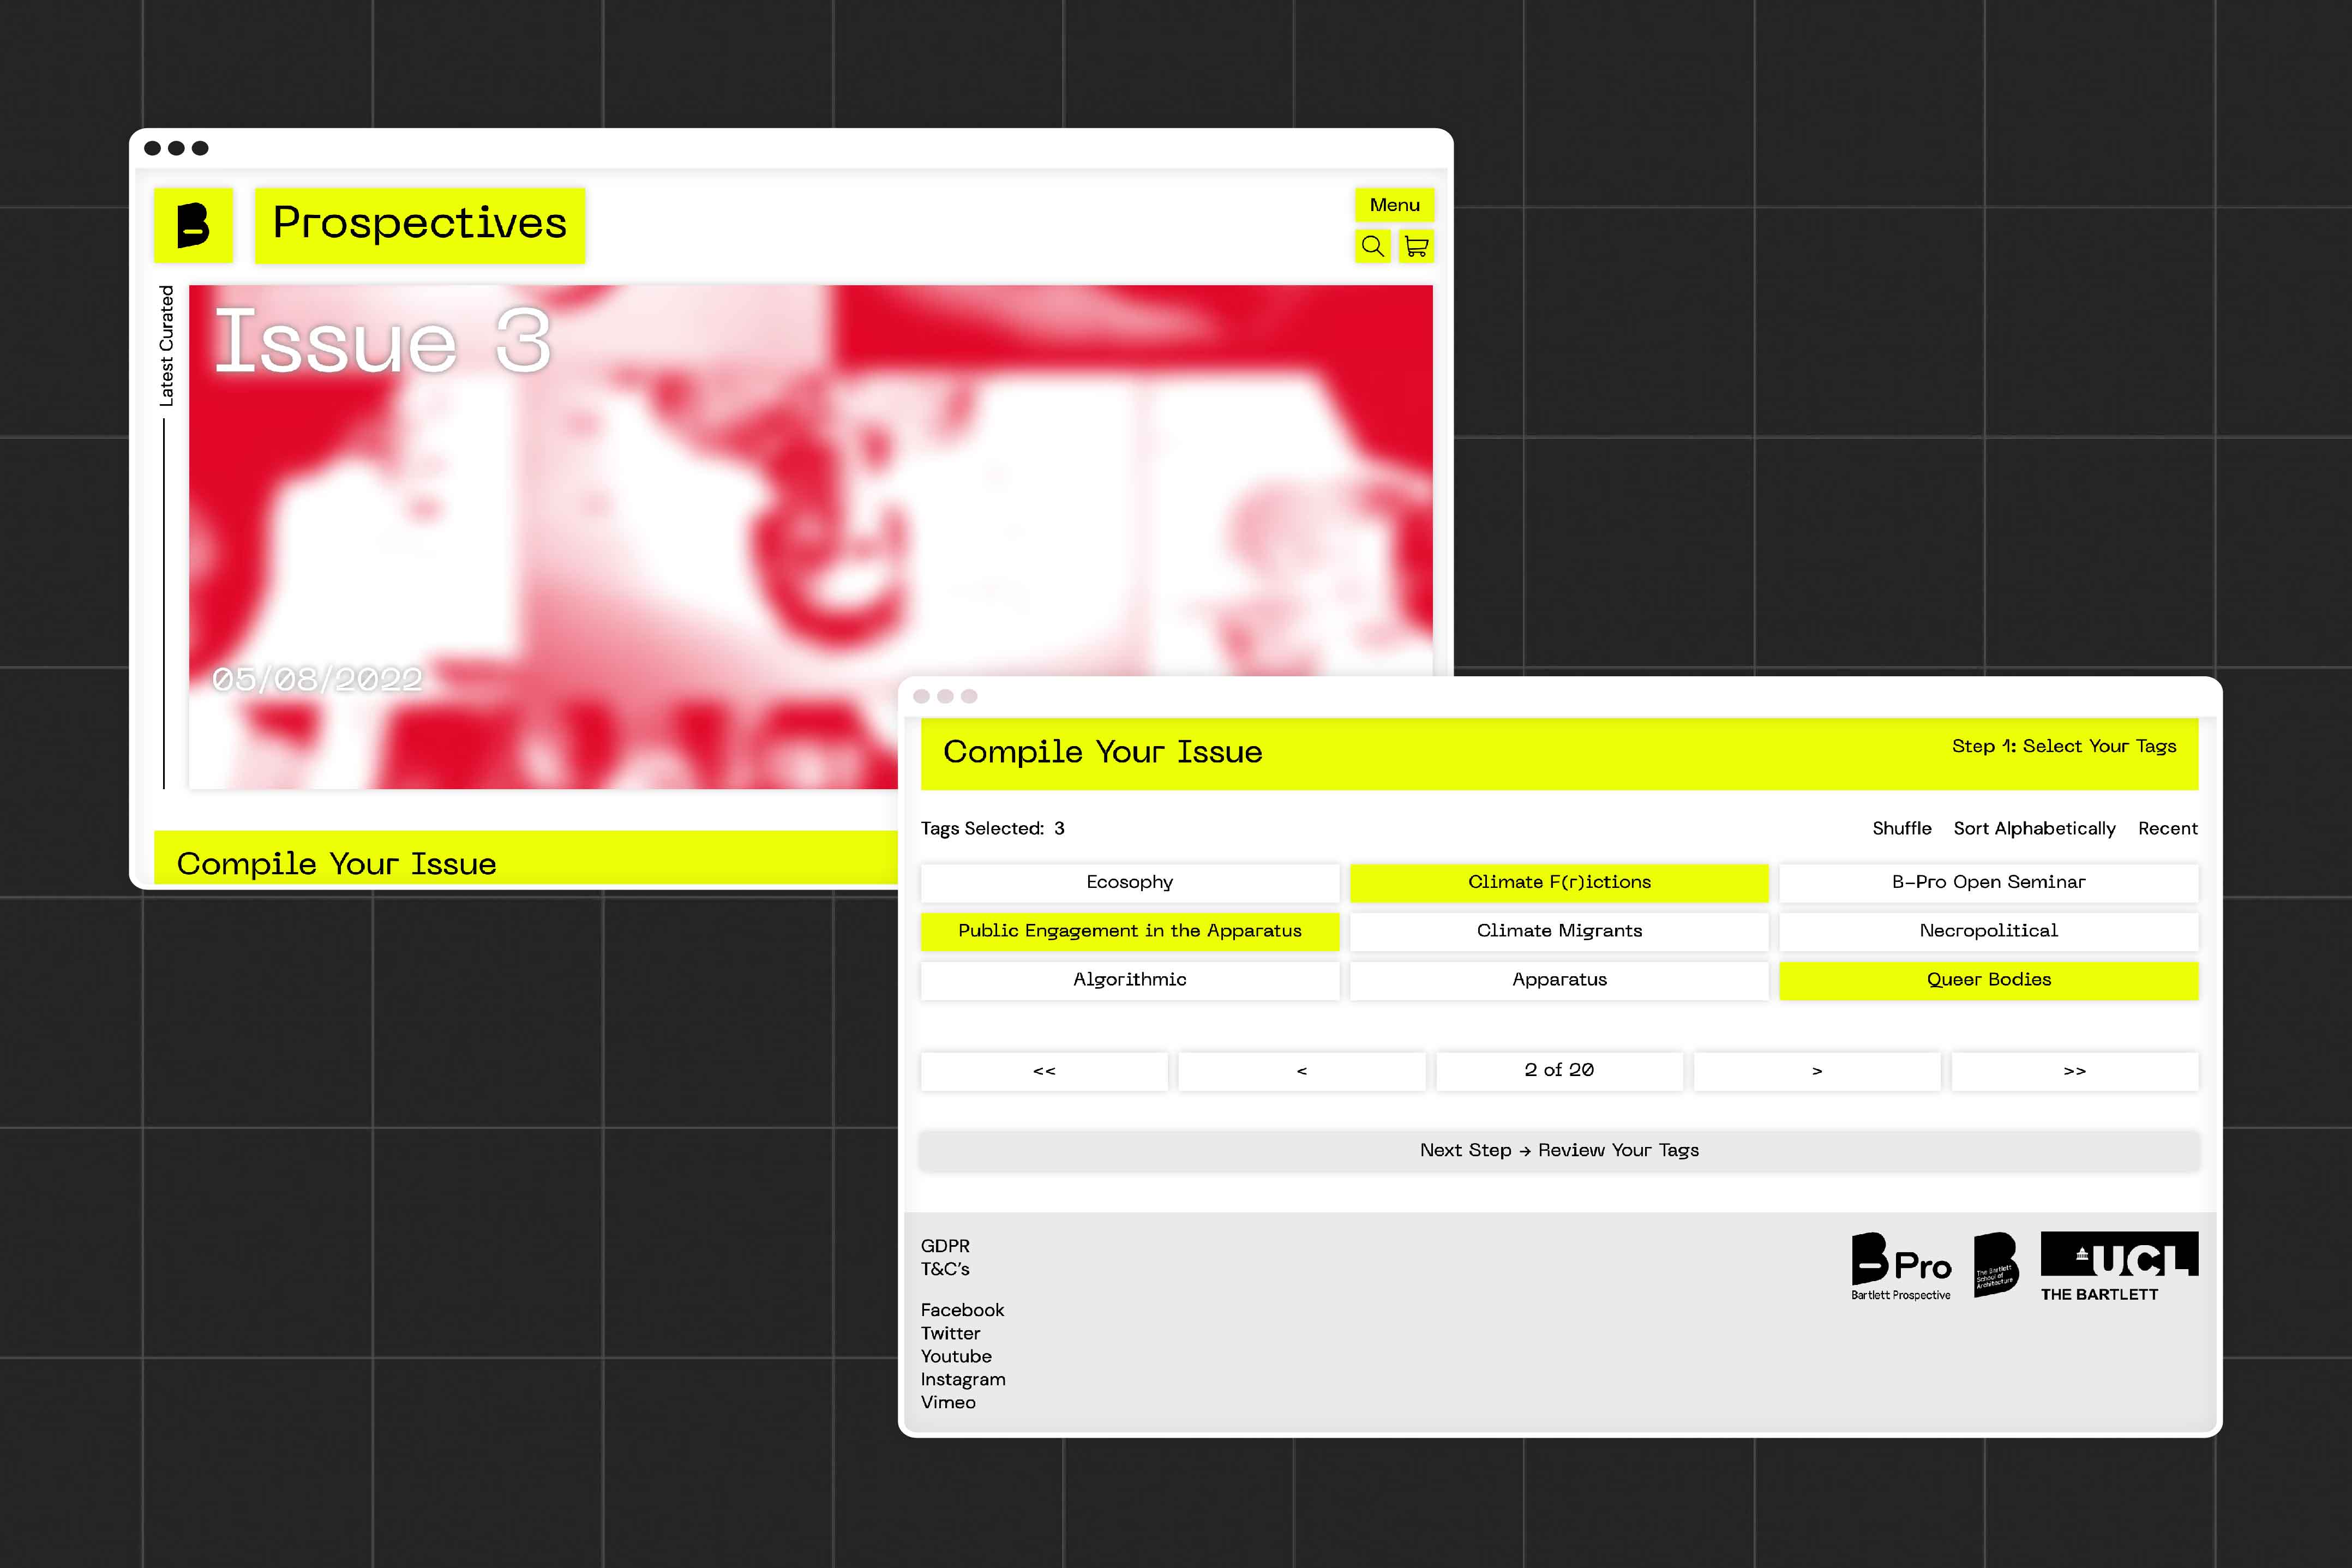 An image of the prospectives website, showing the homepage with a large red, blurred hero image. A second image shows how users use the website to build a original Issue using tags based on themes.